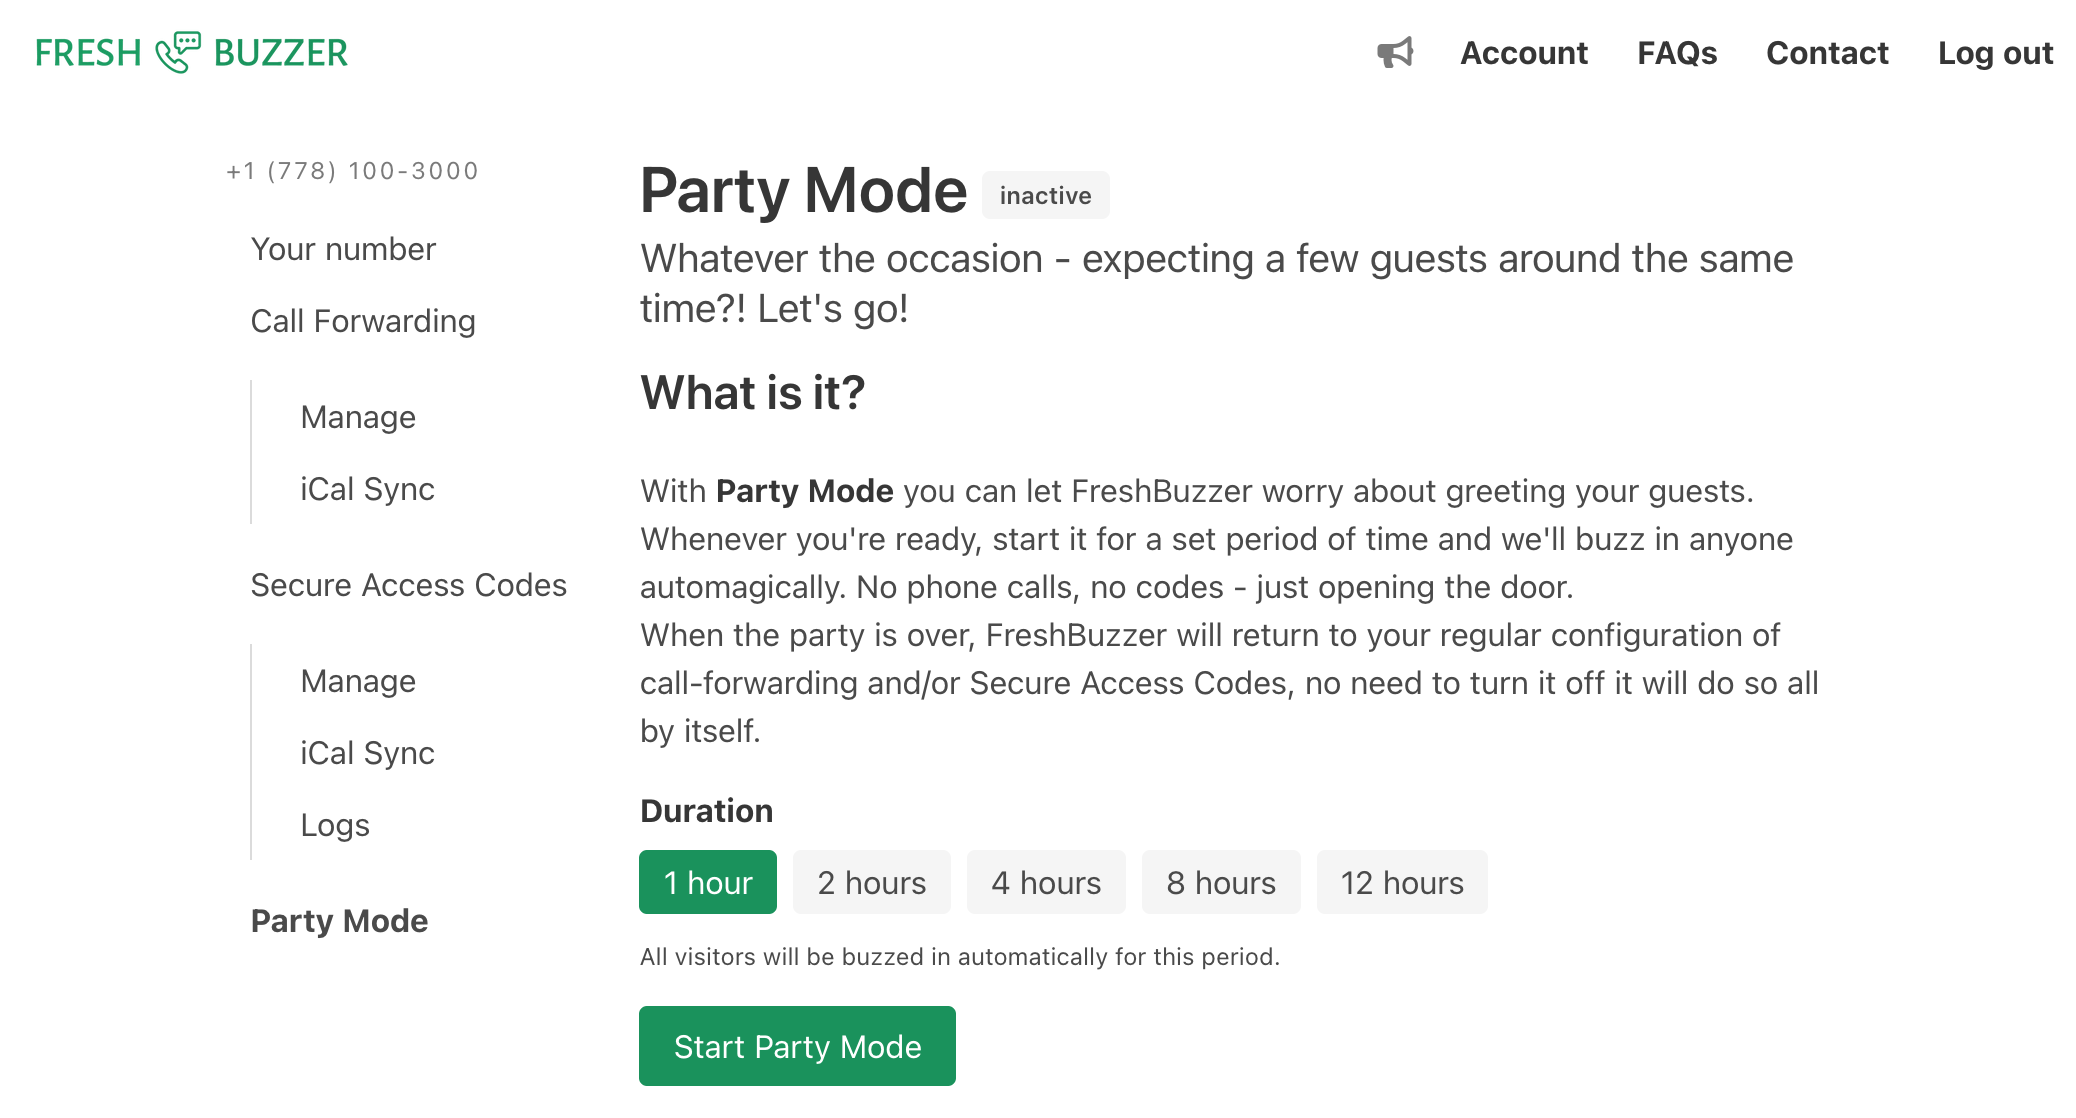 Screenshot of the Party Mode settings page in your FreshBuzzer account.